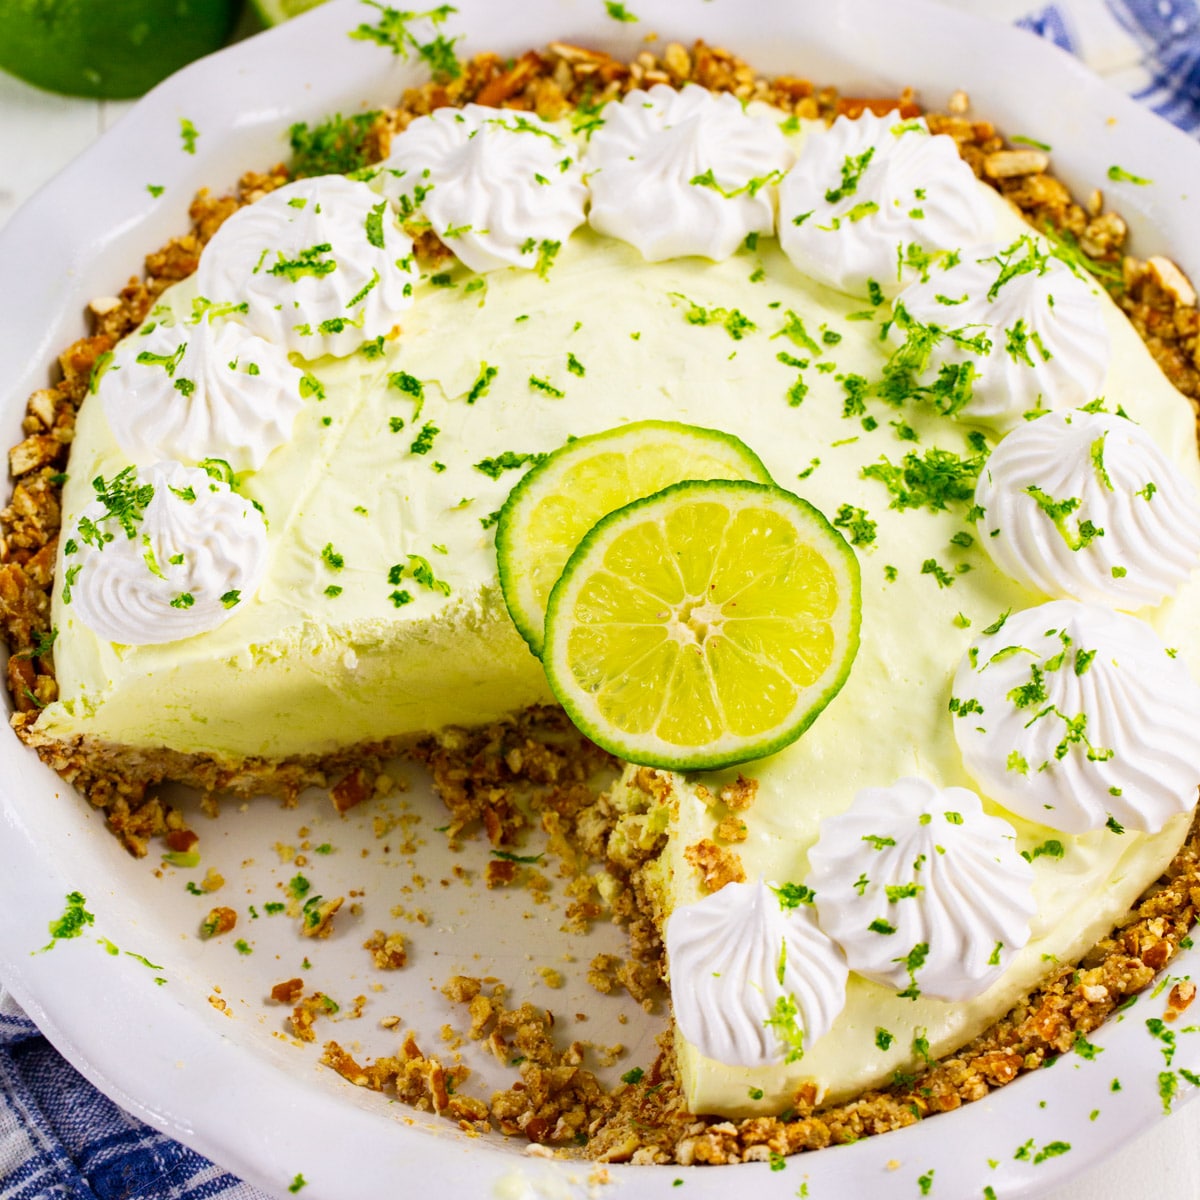 No-Bake Margarita Pie in pie pan with slice cut out.